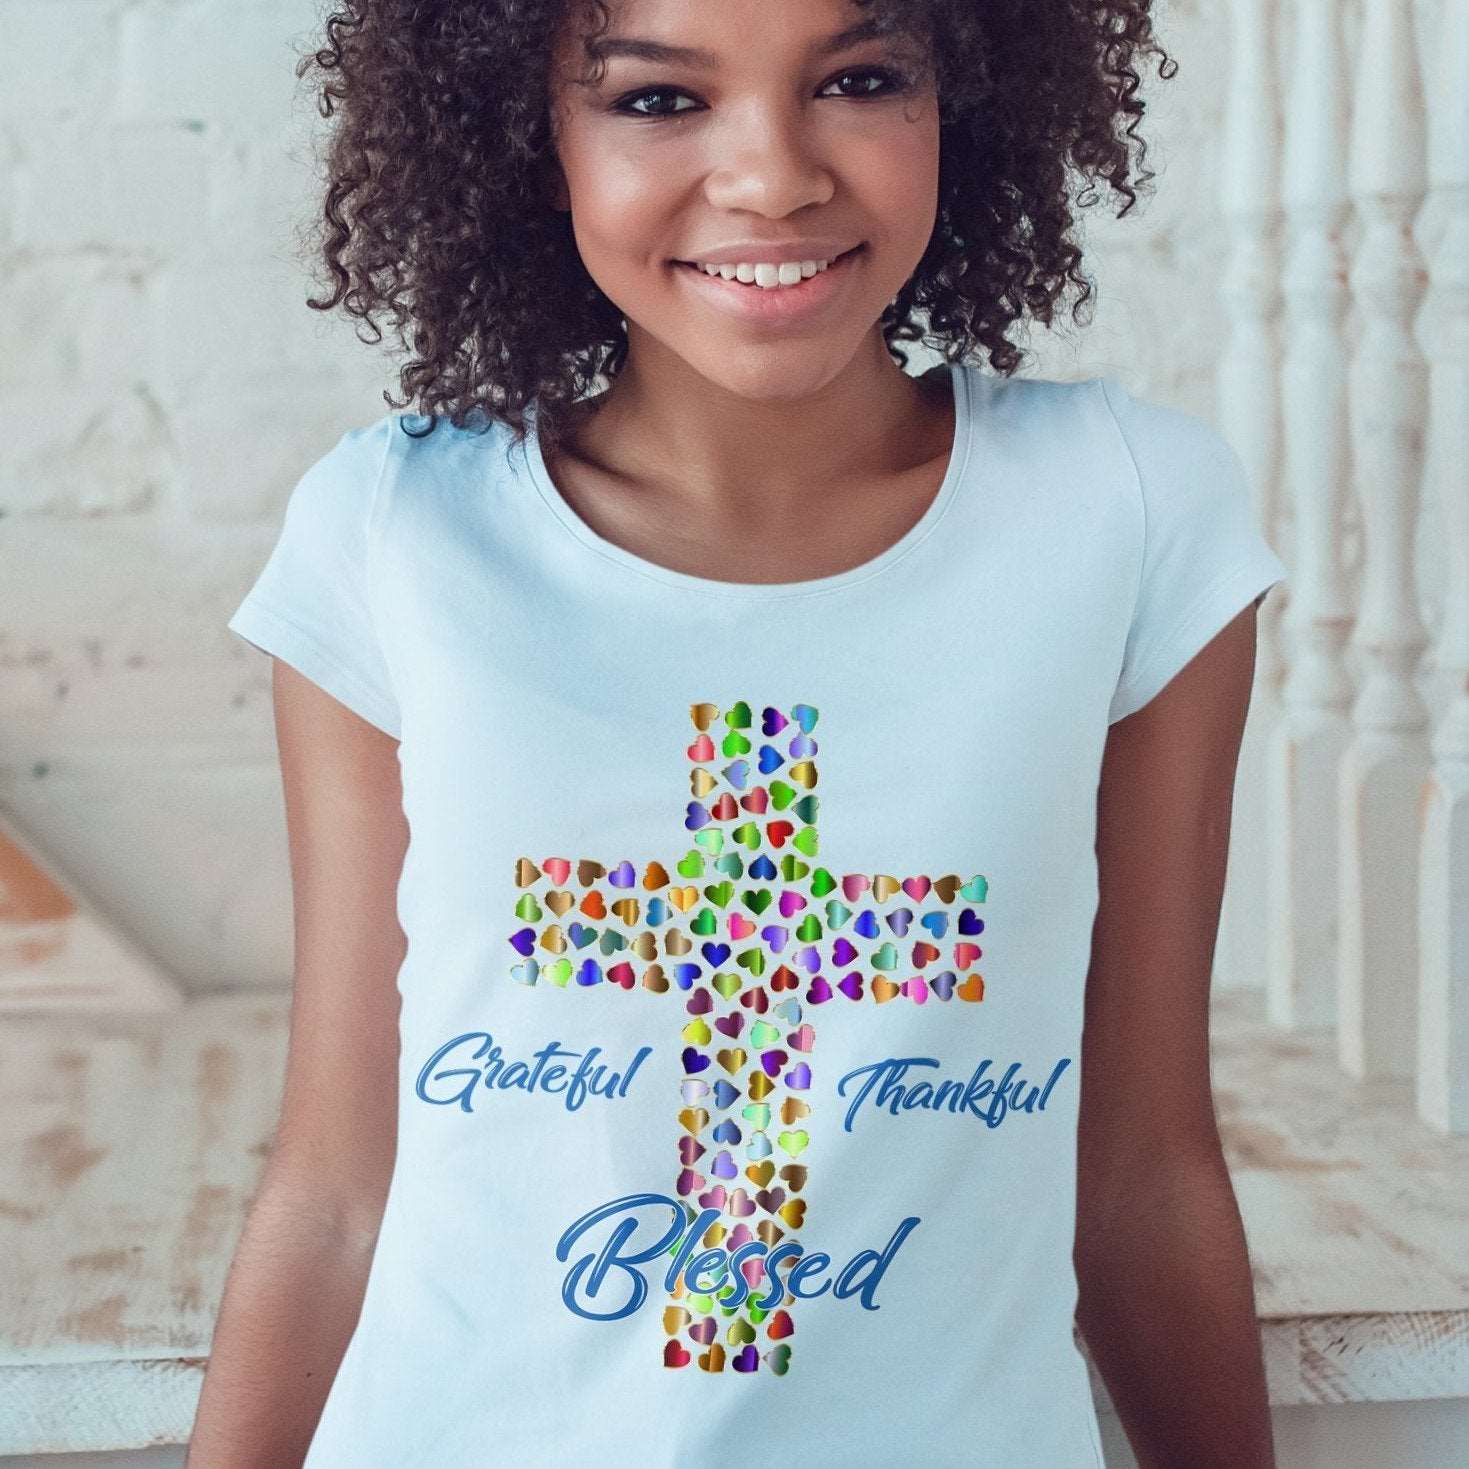 Grateful, Thankful, Blessed Graphic T-Shirt - My Custom Tee Party